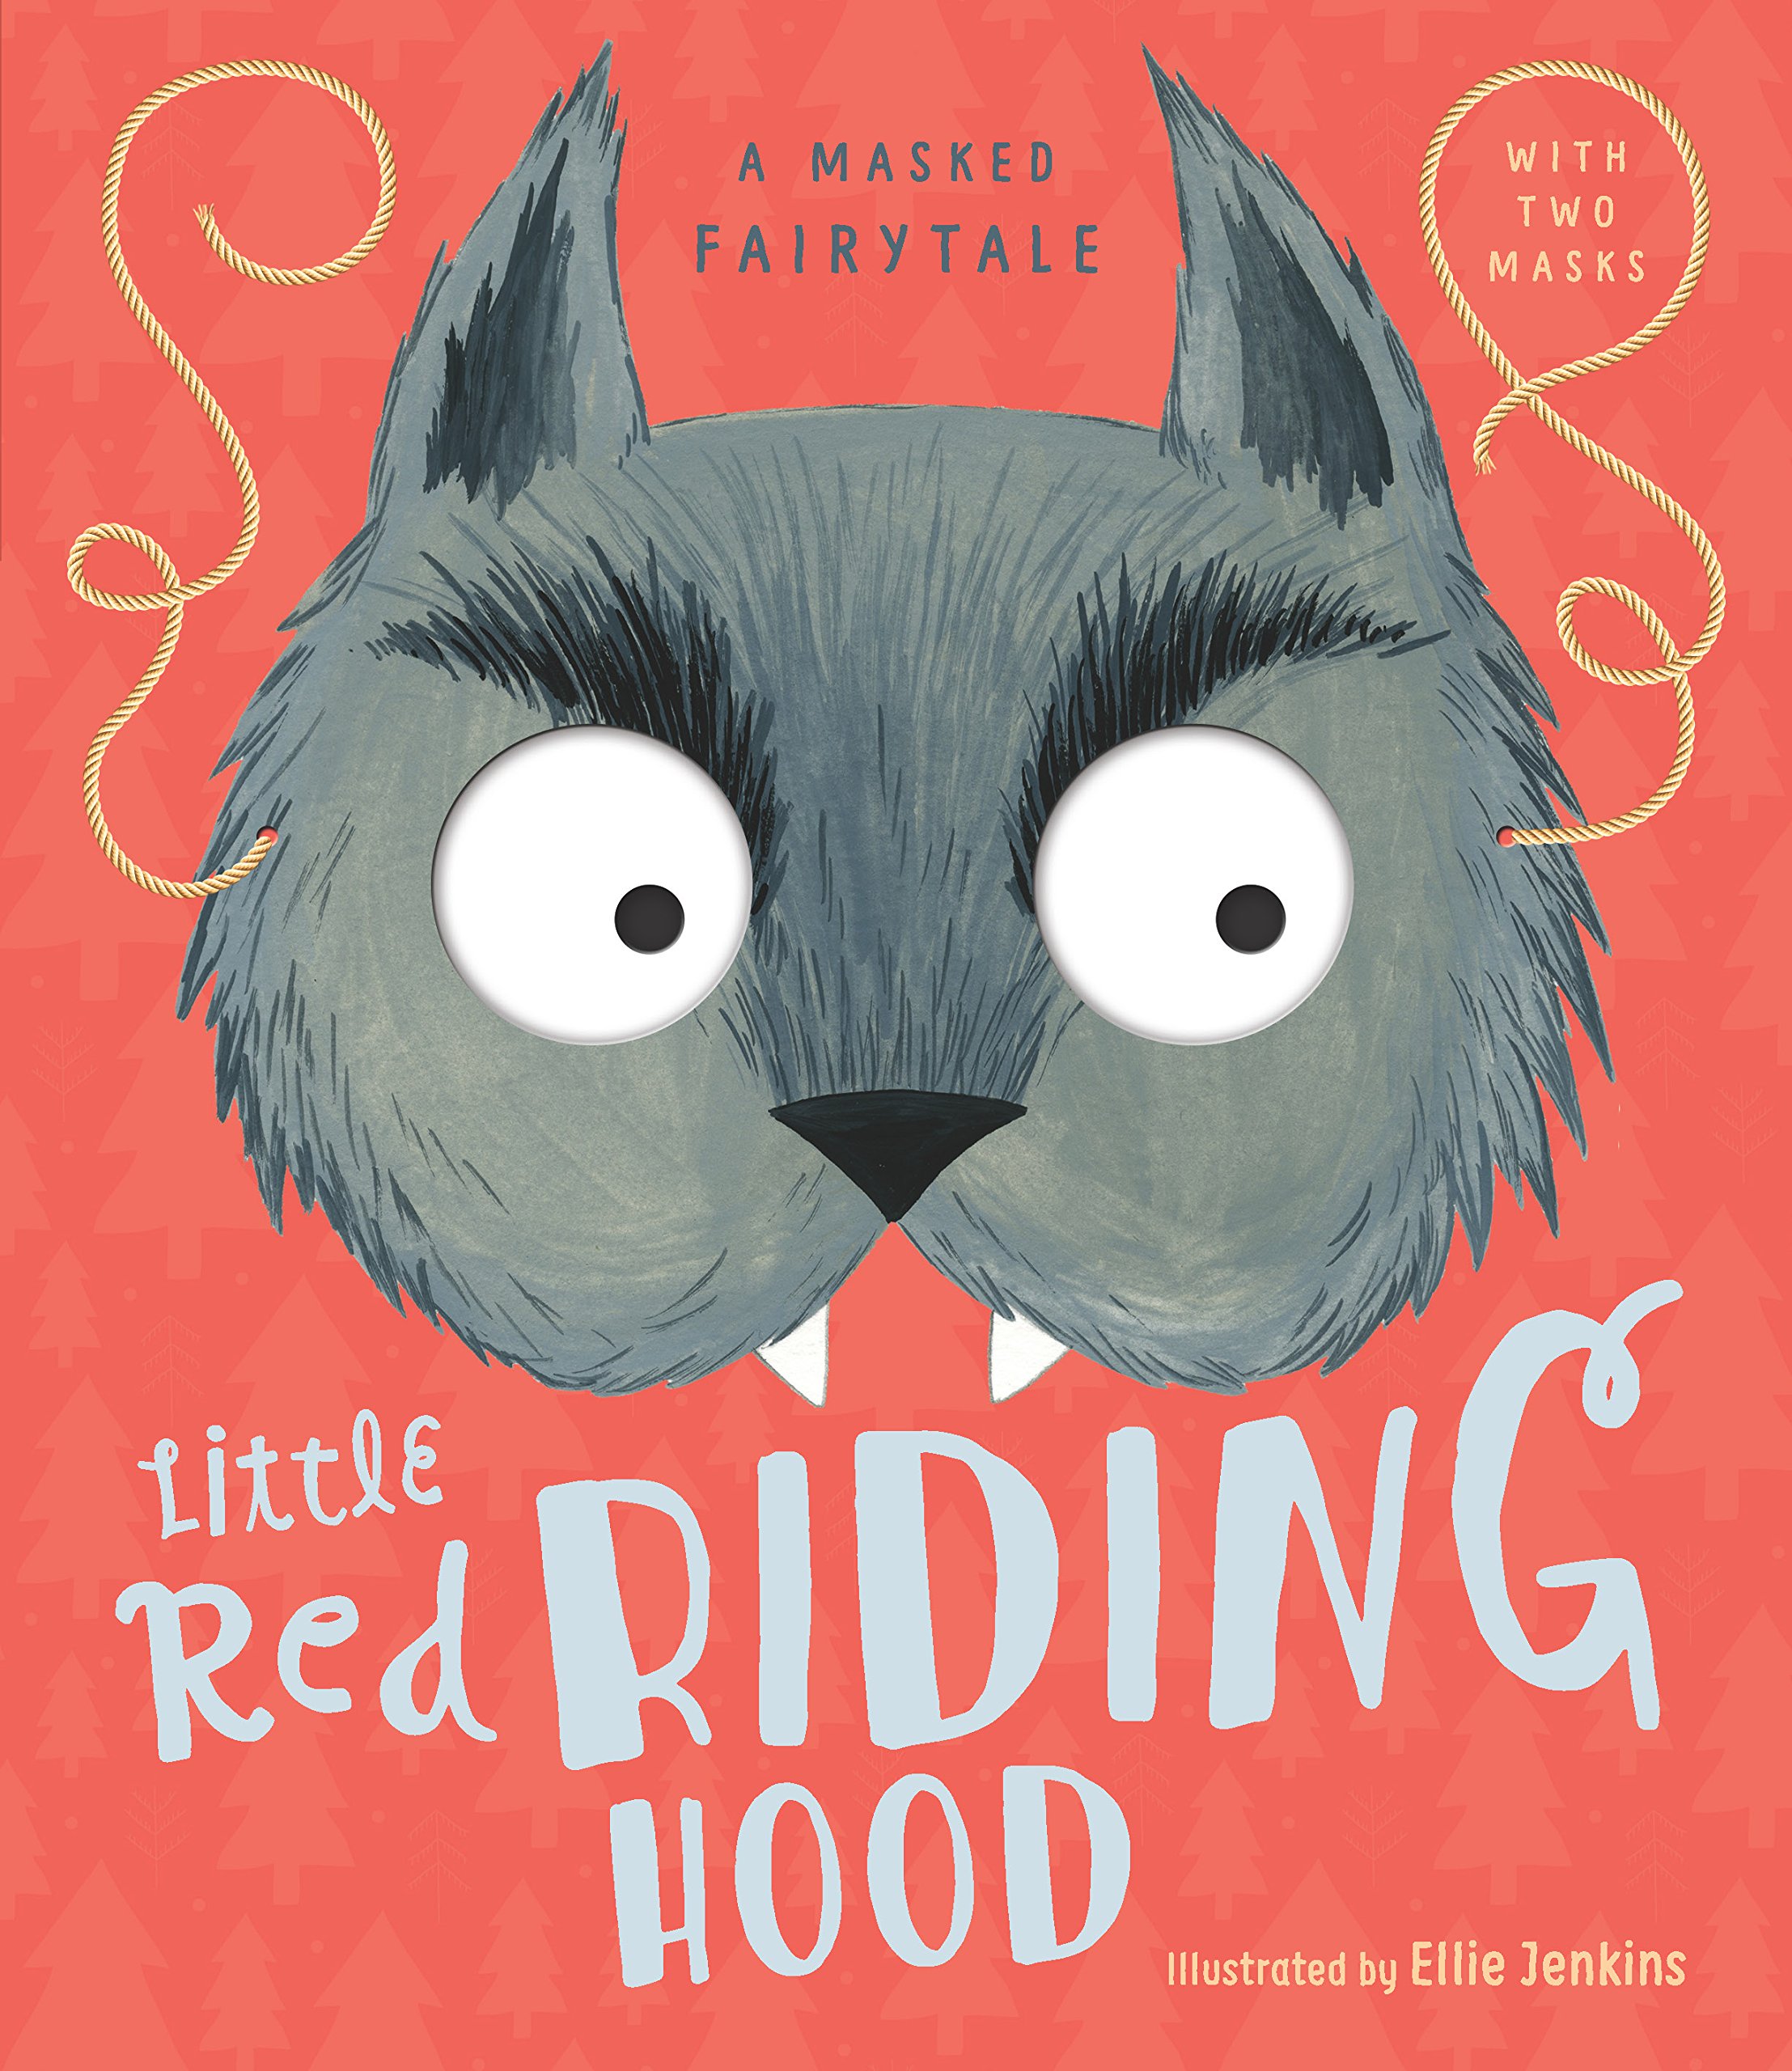 A Masked Fairytale - Little Red Riding Hood